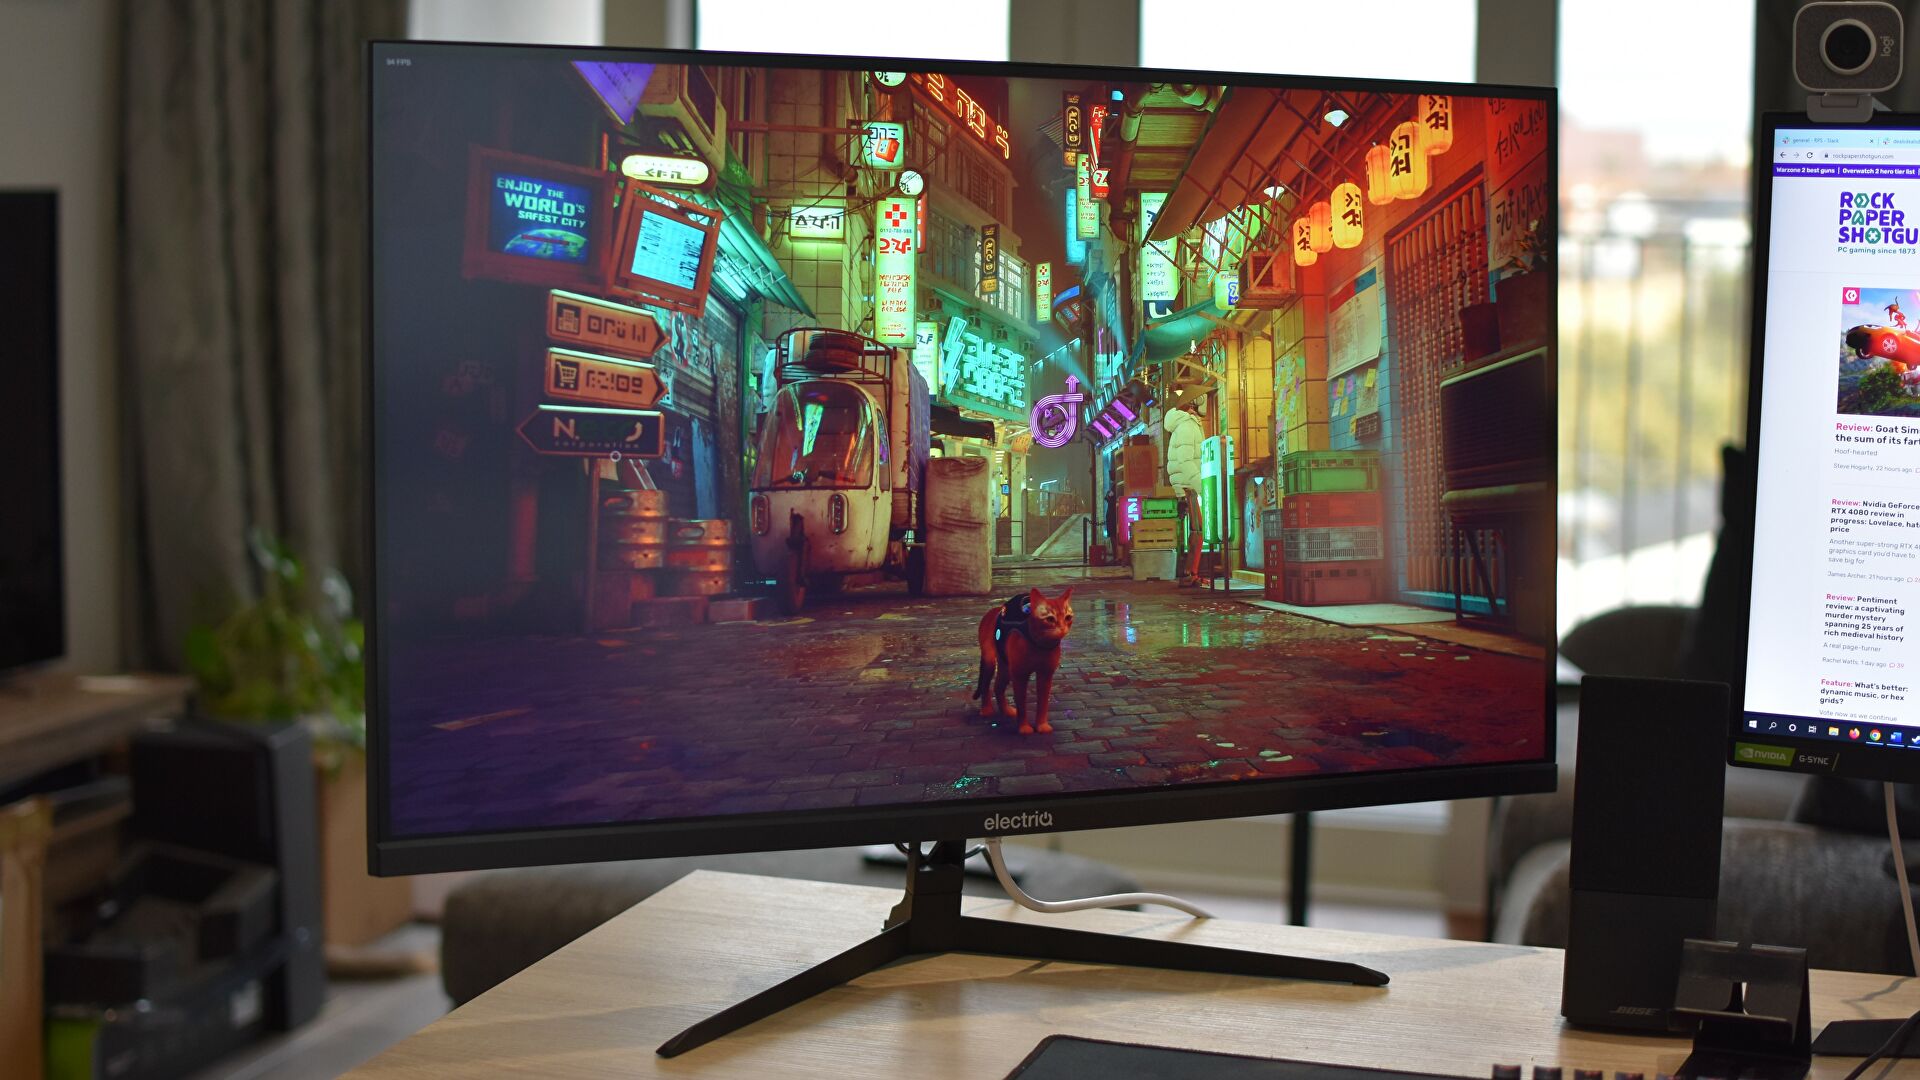 The surprising un-rubbishness of my secondhand, bargain bin 4K monitor